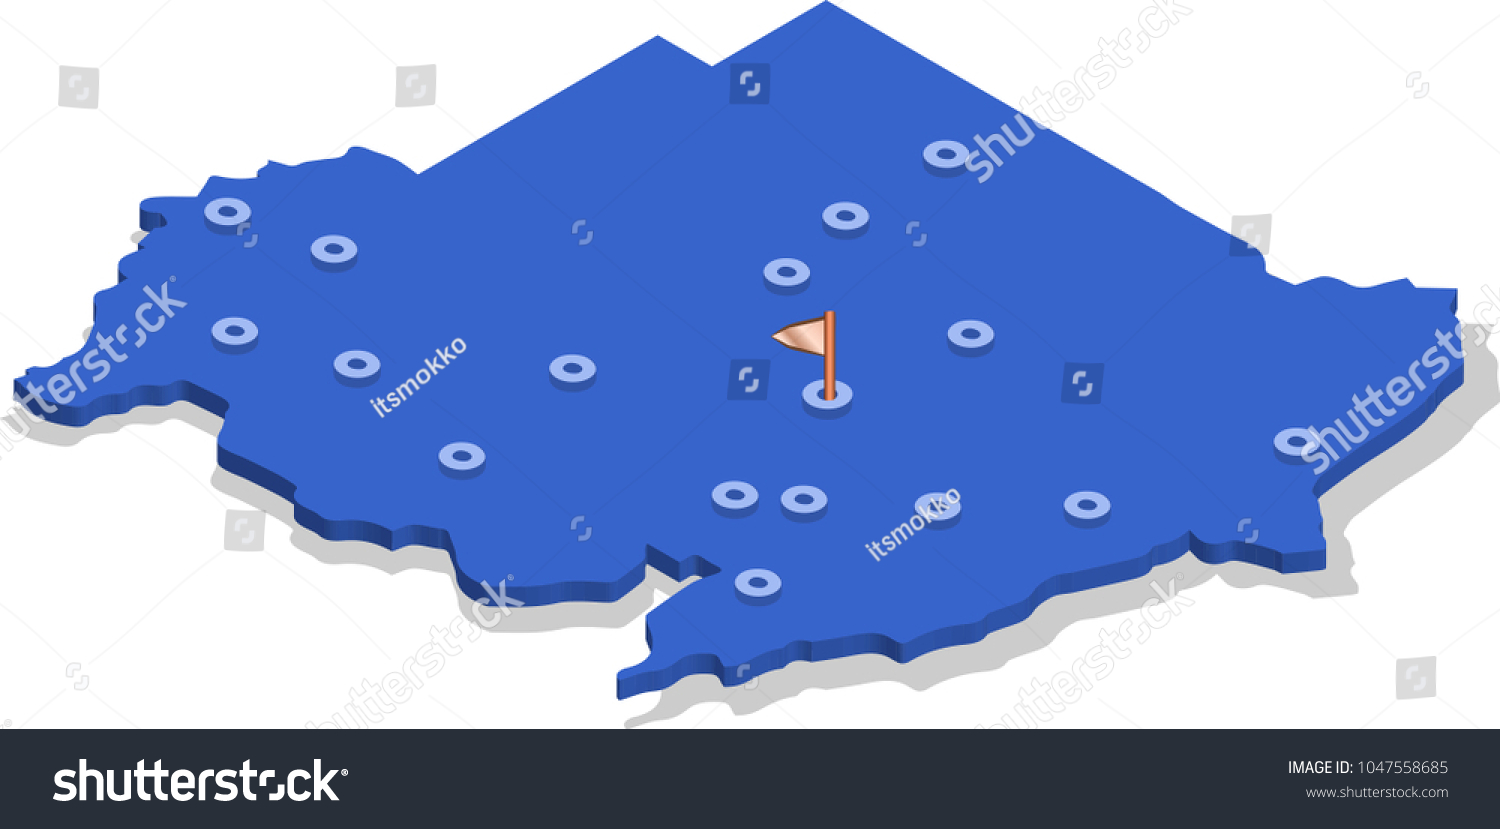 3d isometric view map of Sudan with blue surface and cities. Isolated, white background #1047558685